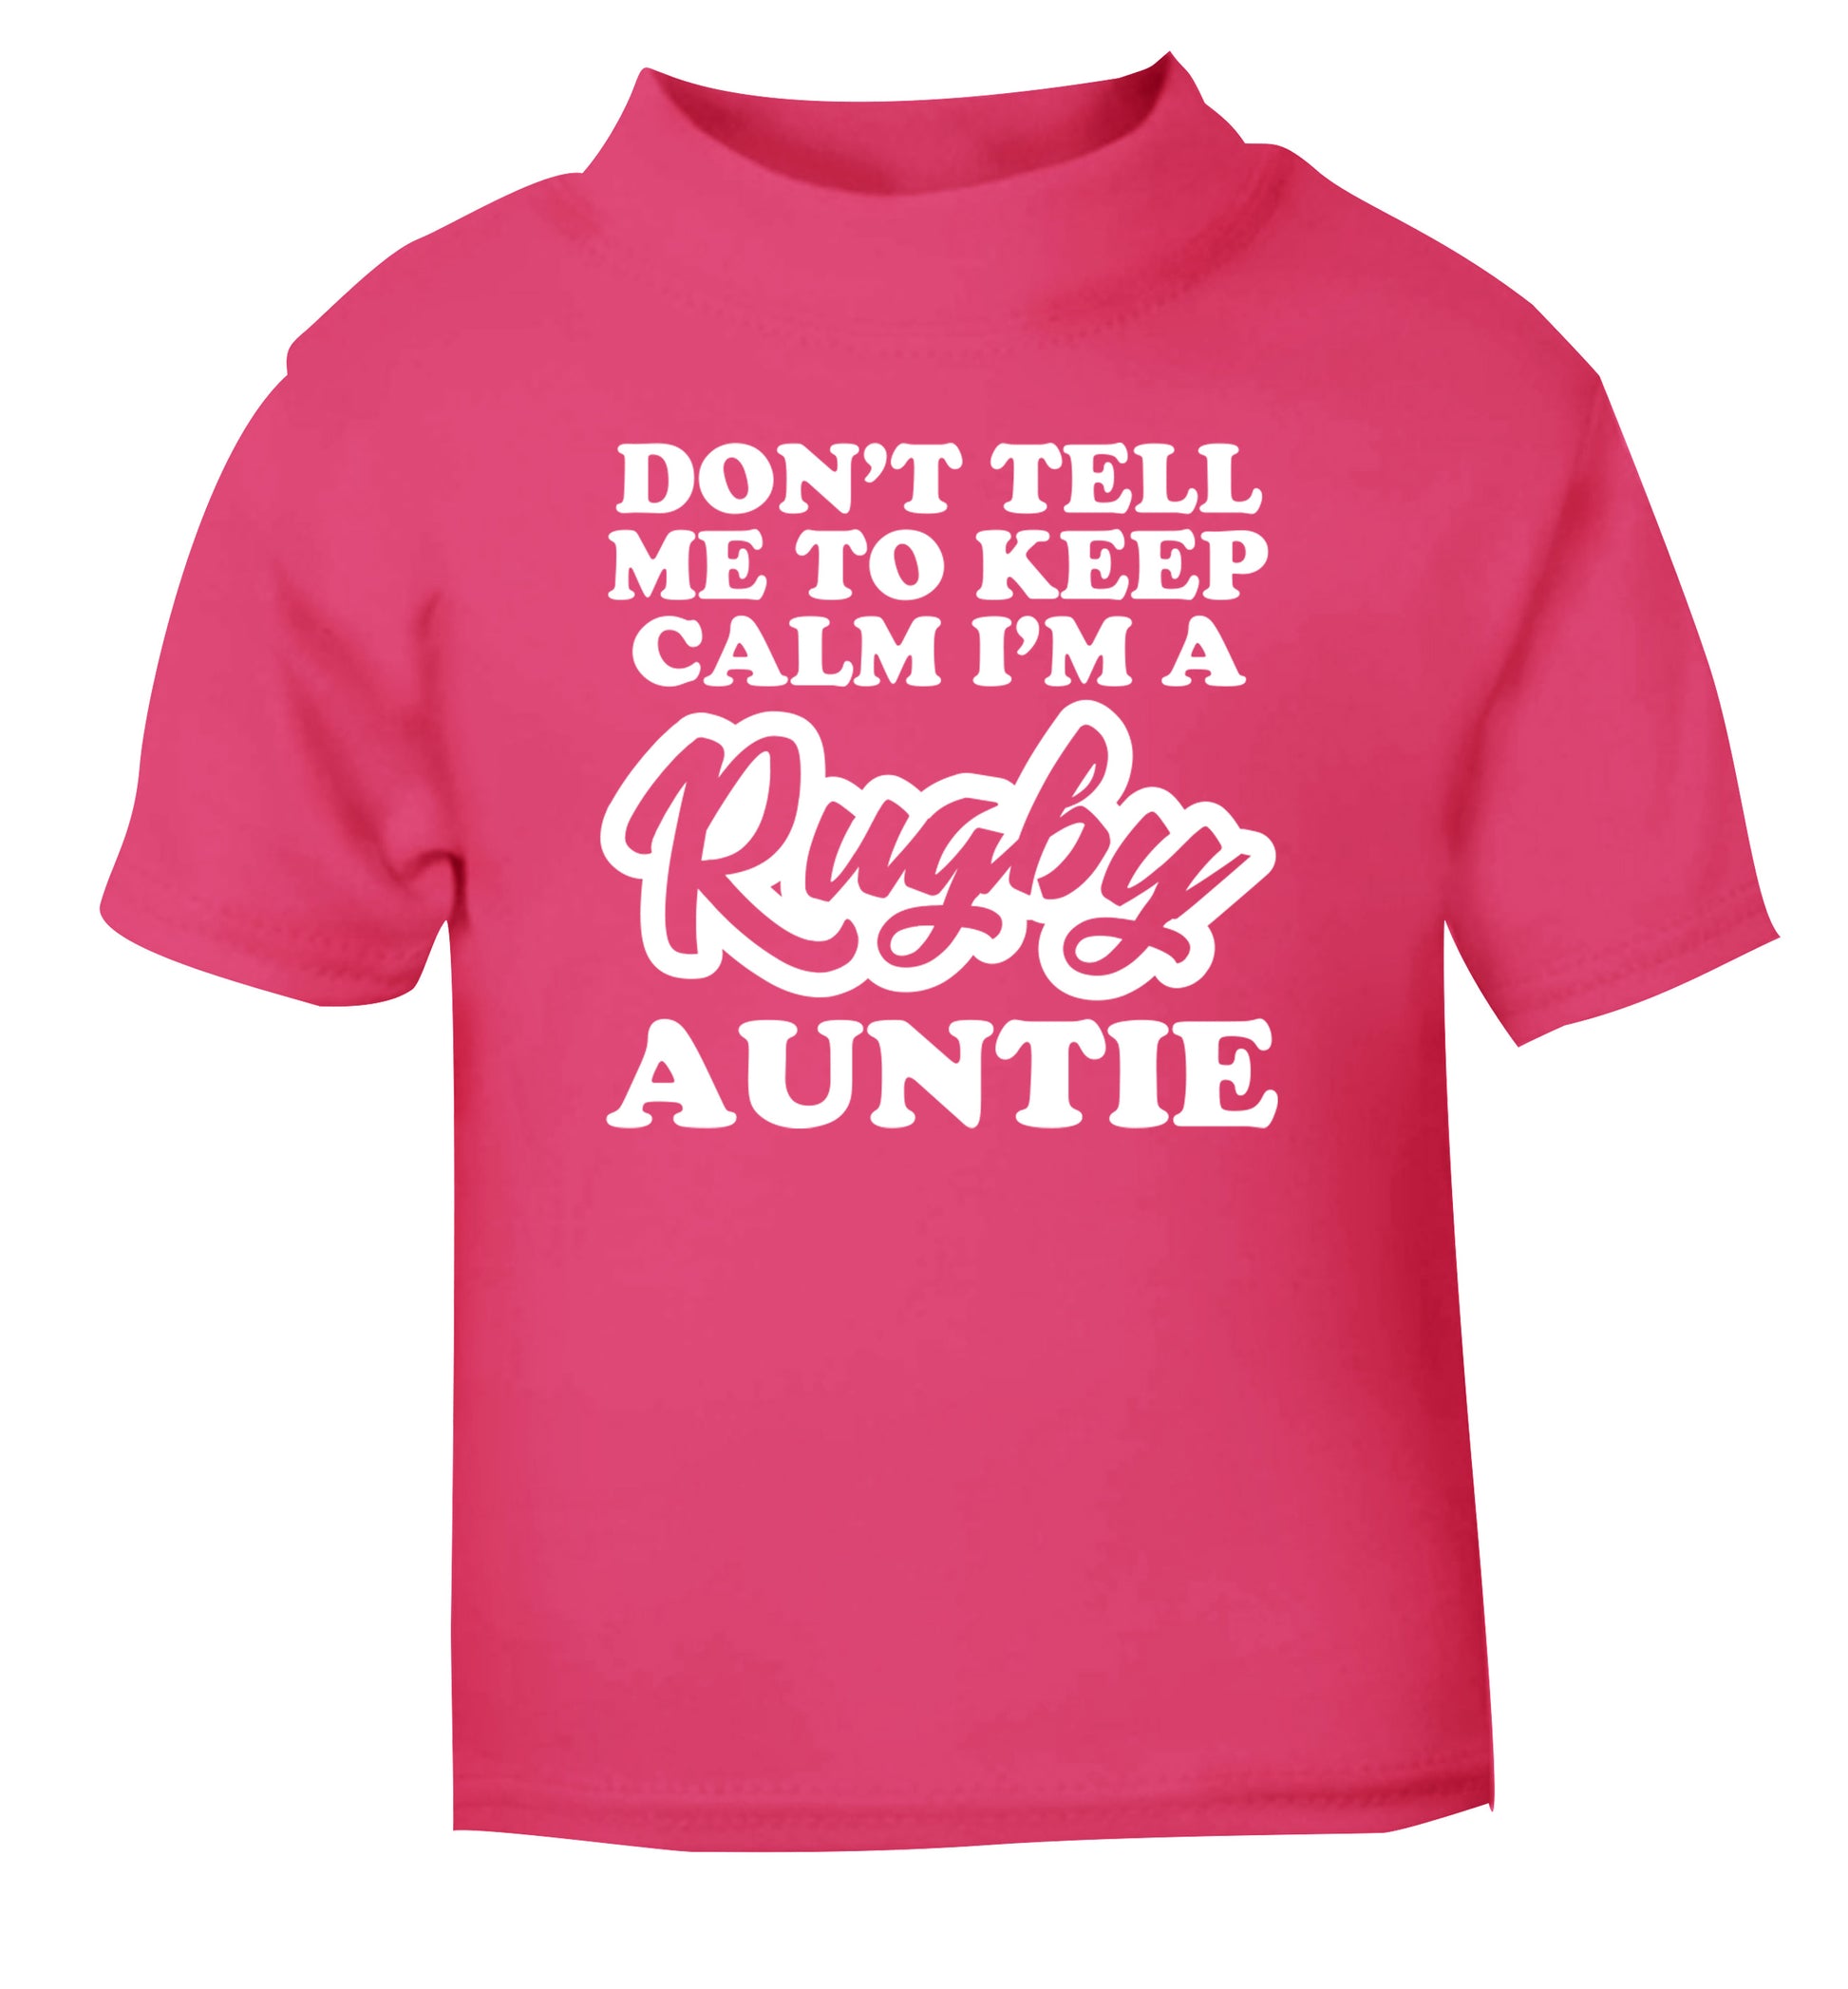 Don't tell me keep calm I'm a rugby auntie pink Baby Toddler Tshirt 2 Years